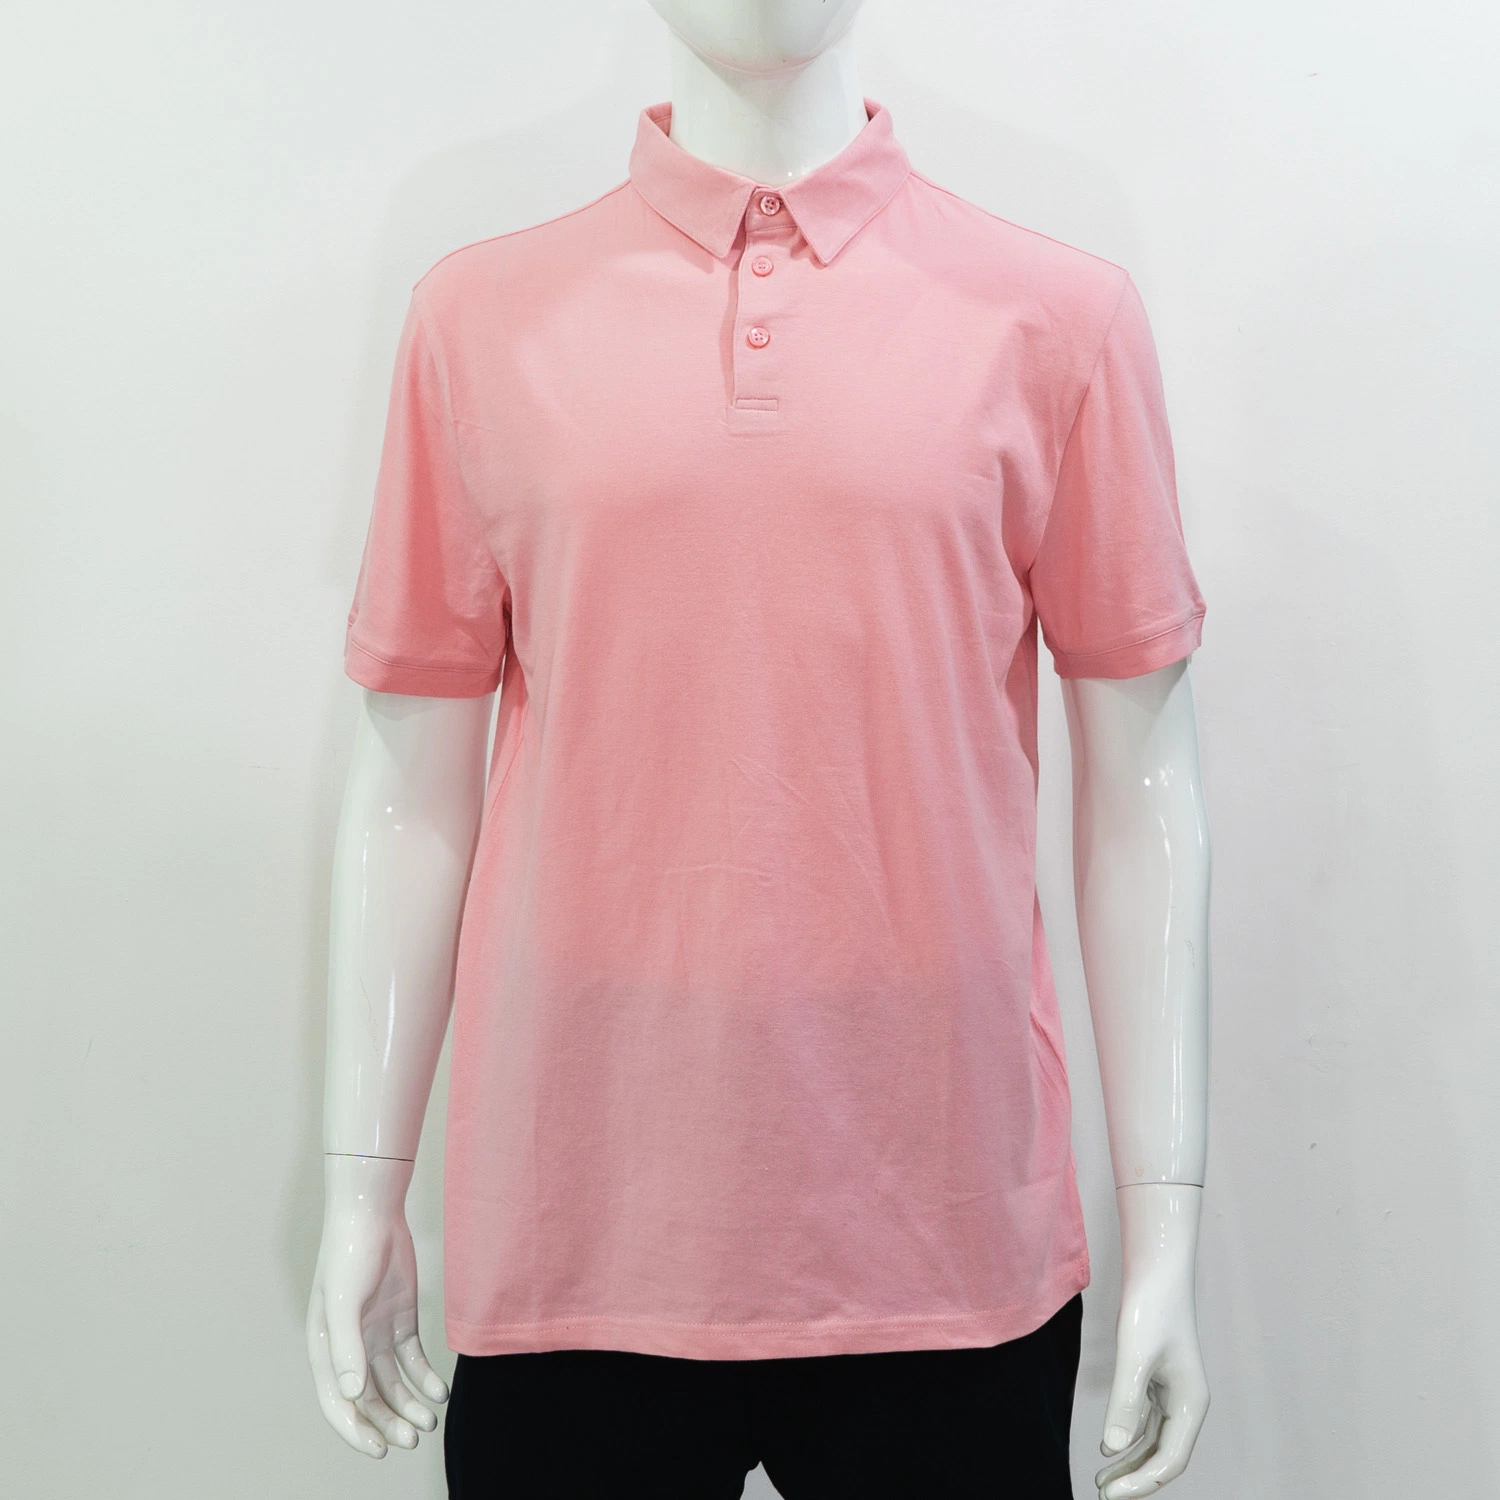 Pink Basic T-Shirt Custom Embroidery Print Short Sleeve Top Wholesale/Supplier Shirt High quality/High cost performance  Apparel Clothes Mens Casual Cotton Polo